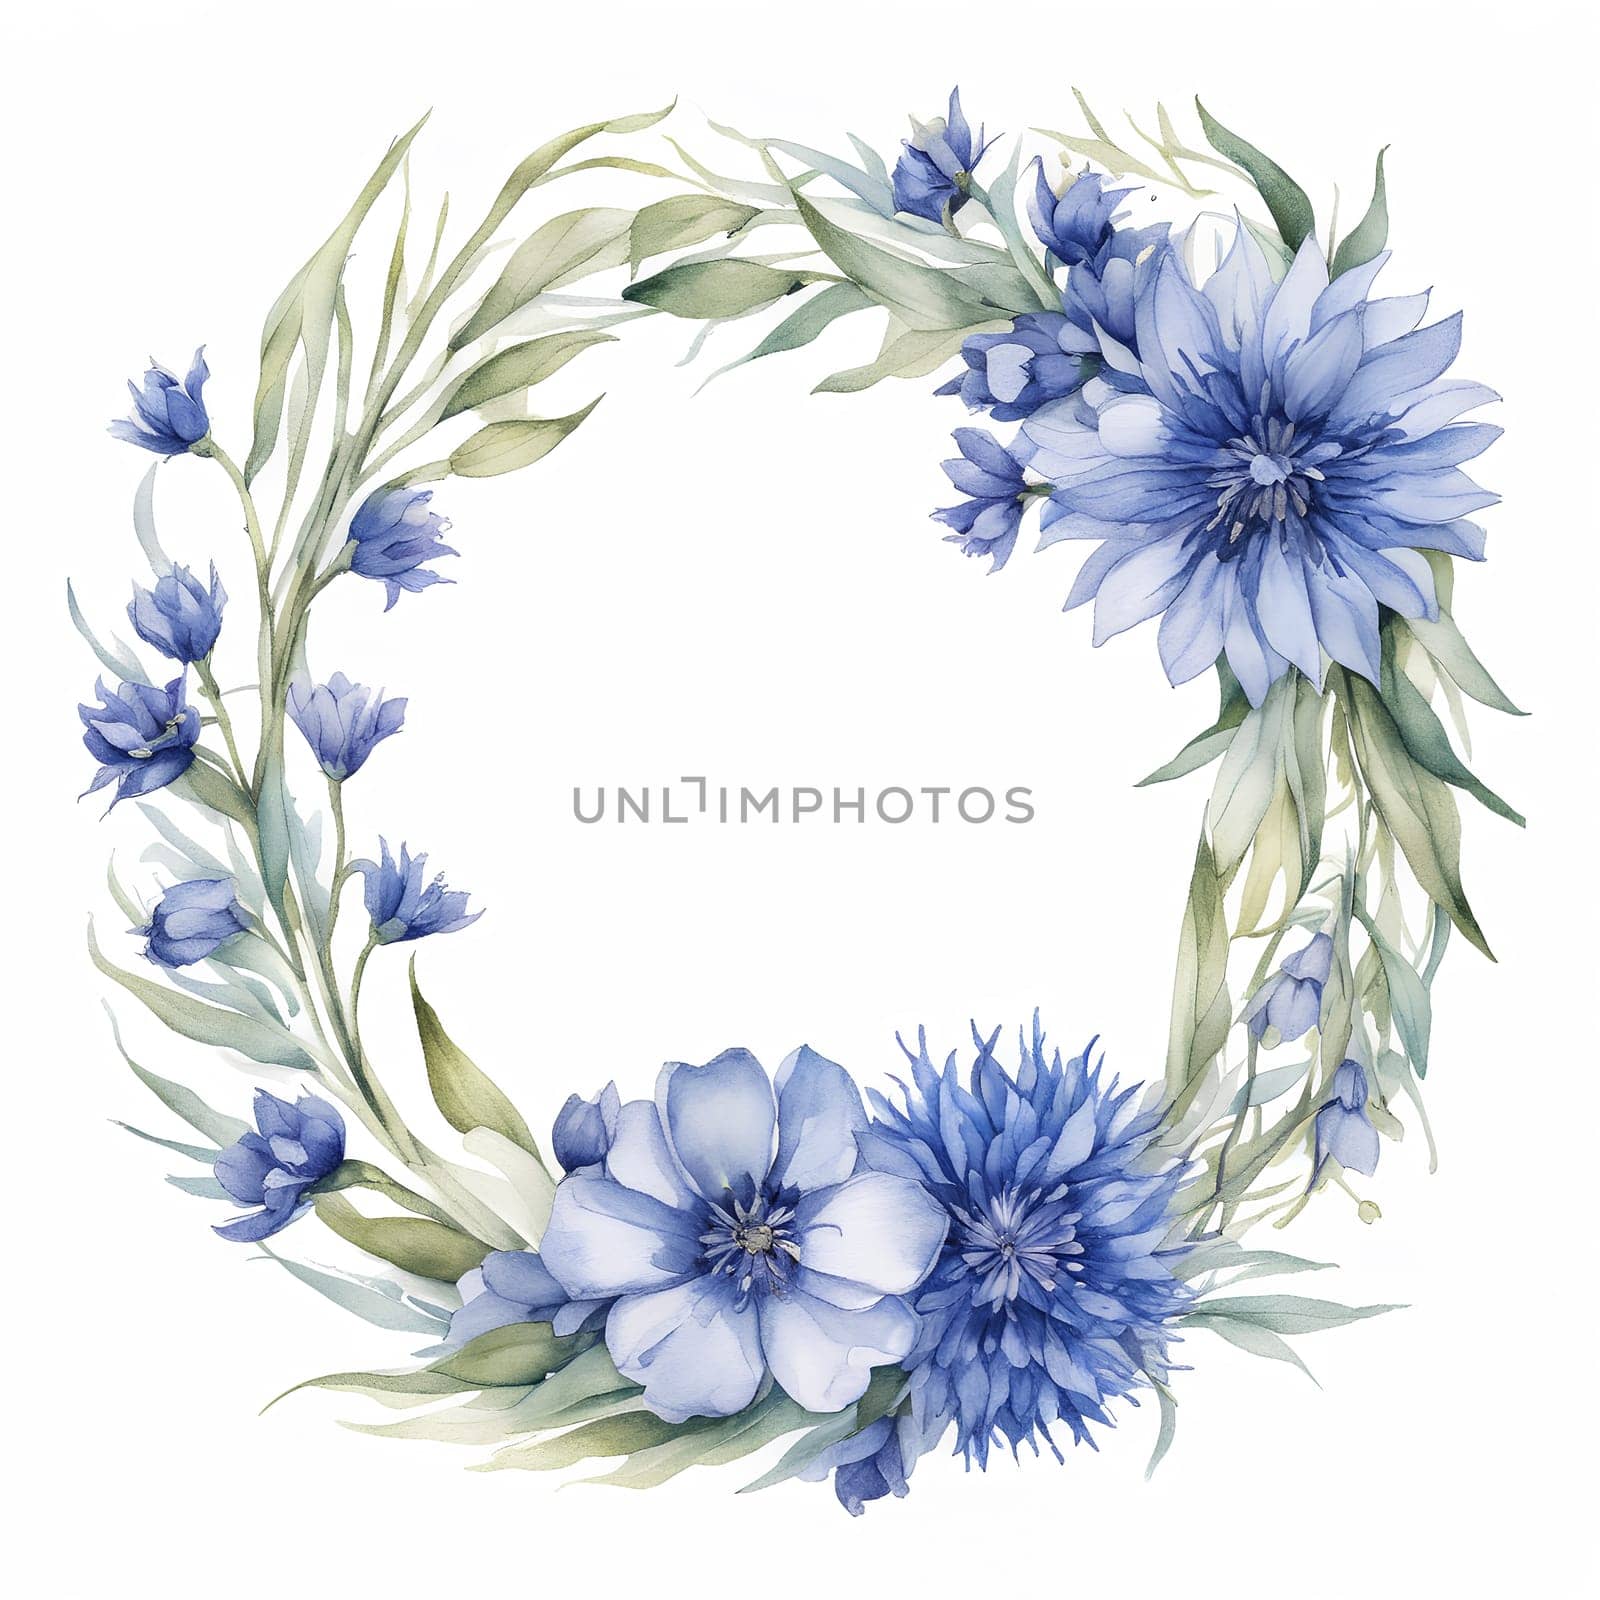 Watercolor flowers wreath in cold colors by Annu1tochka